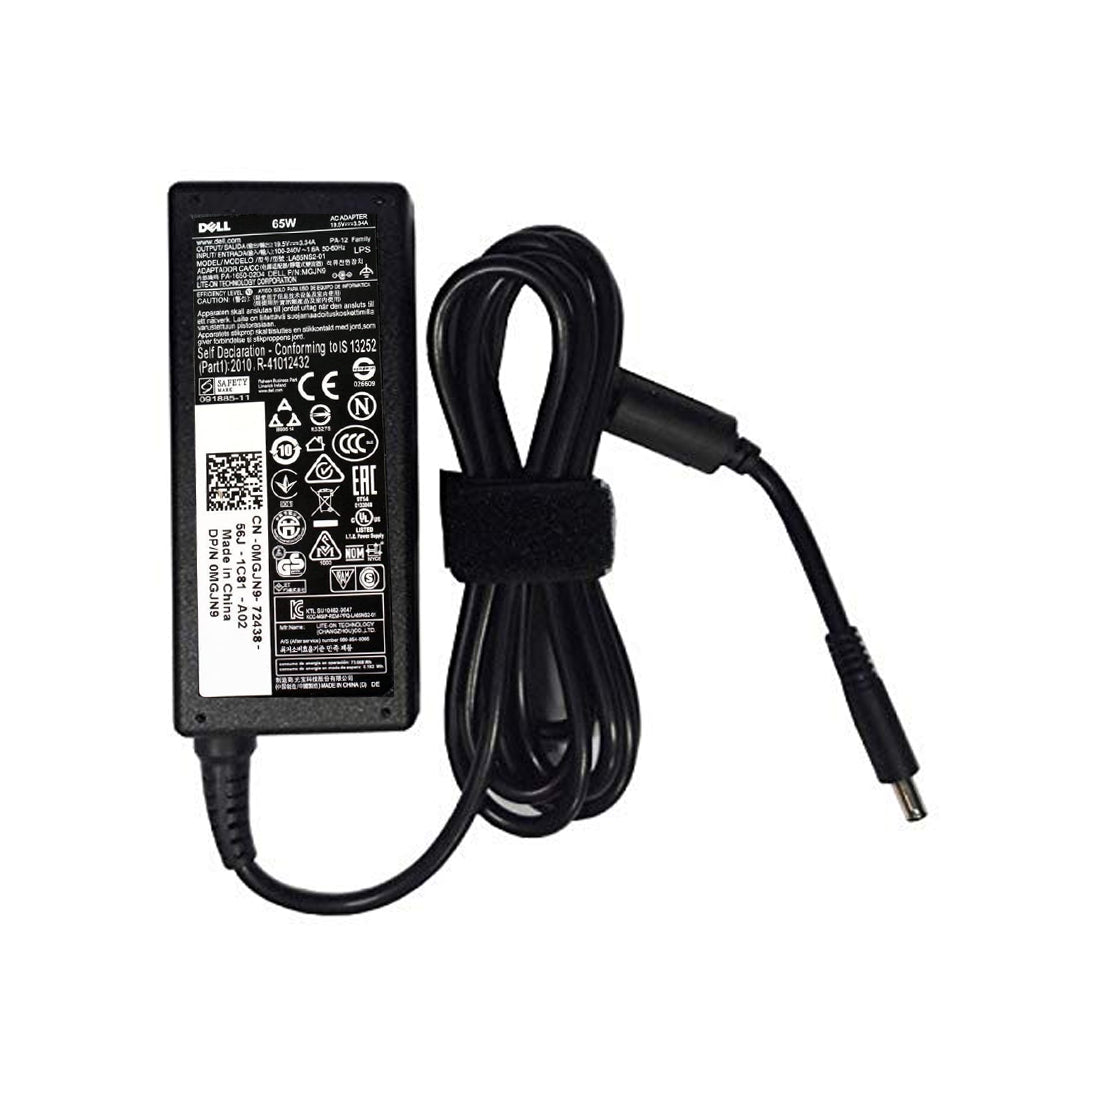 Dell Original 65W 19.5V 4.5mm Pin Laptop Charger Adapter for Inspiron 15 7558 With Power Cord